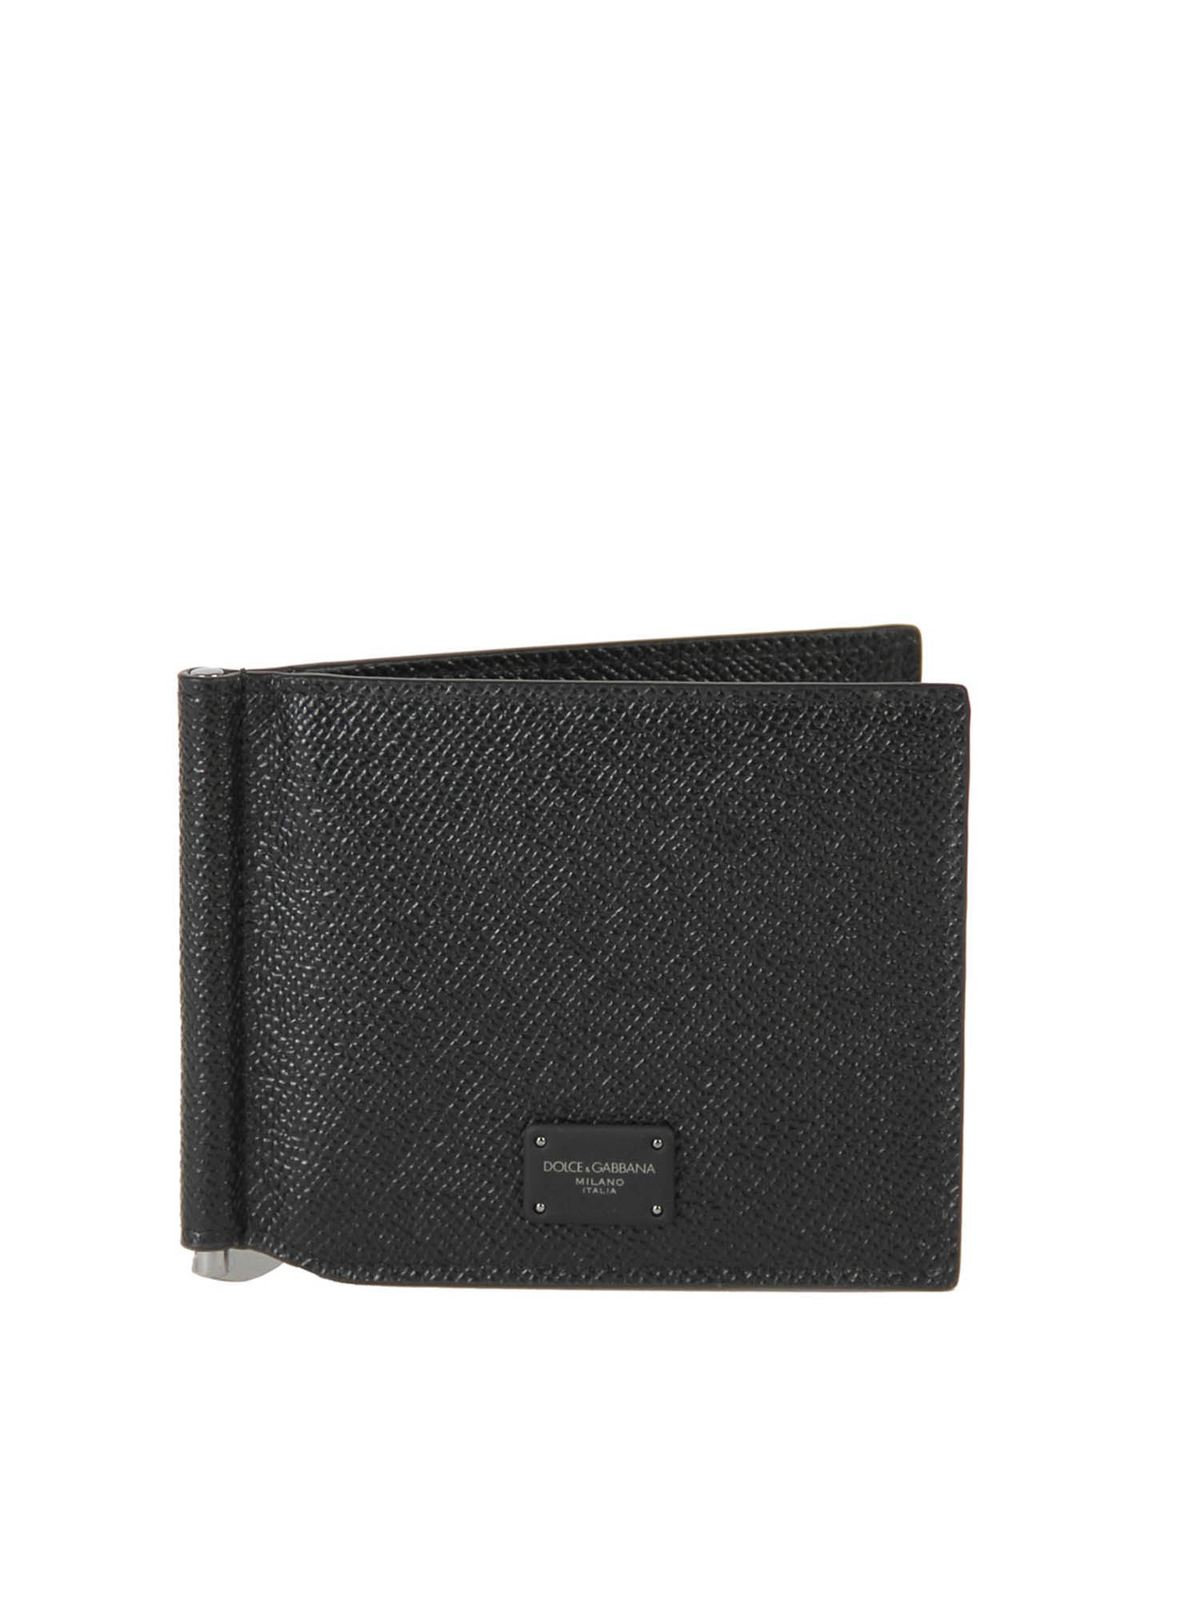 dolce and gabbana wallet